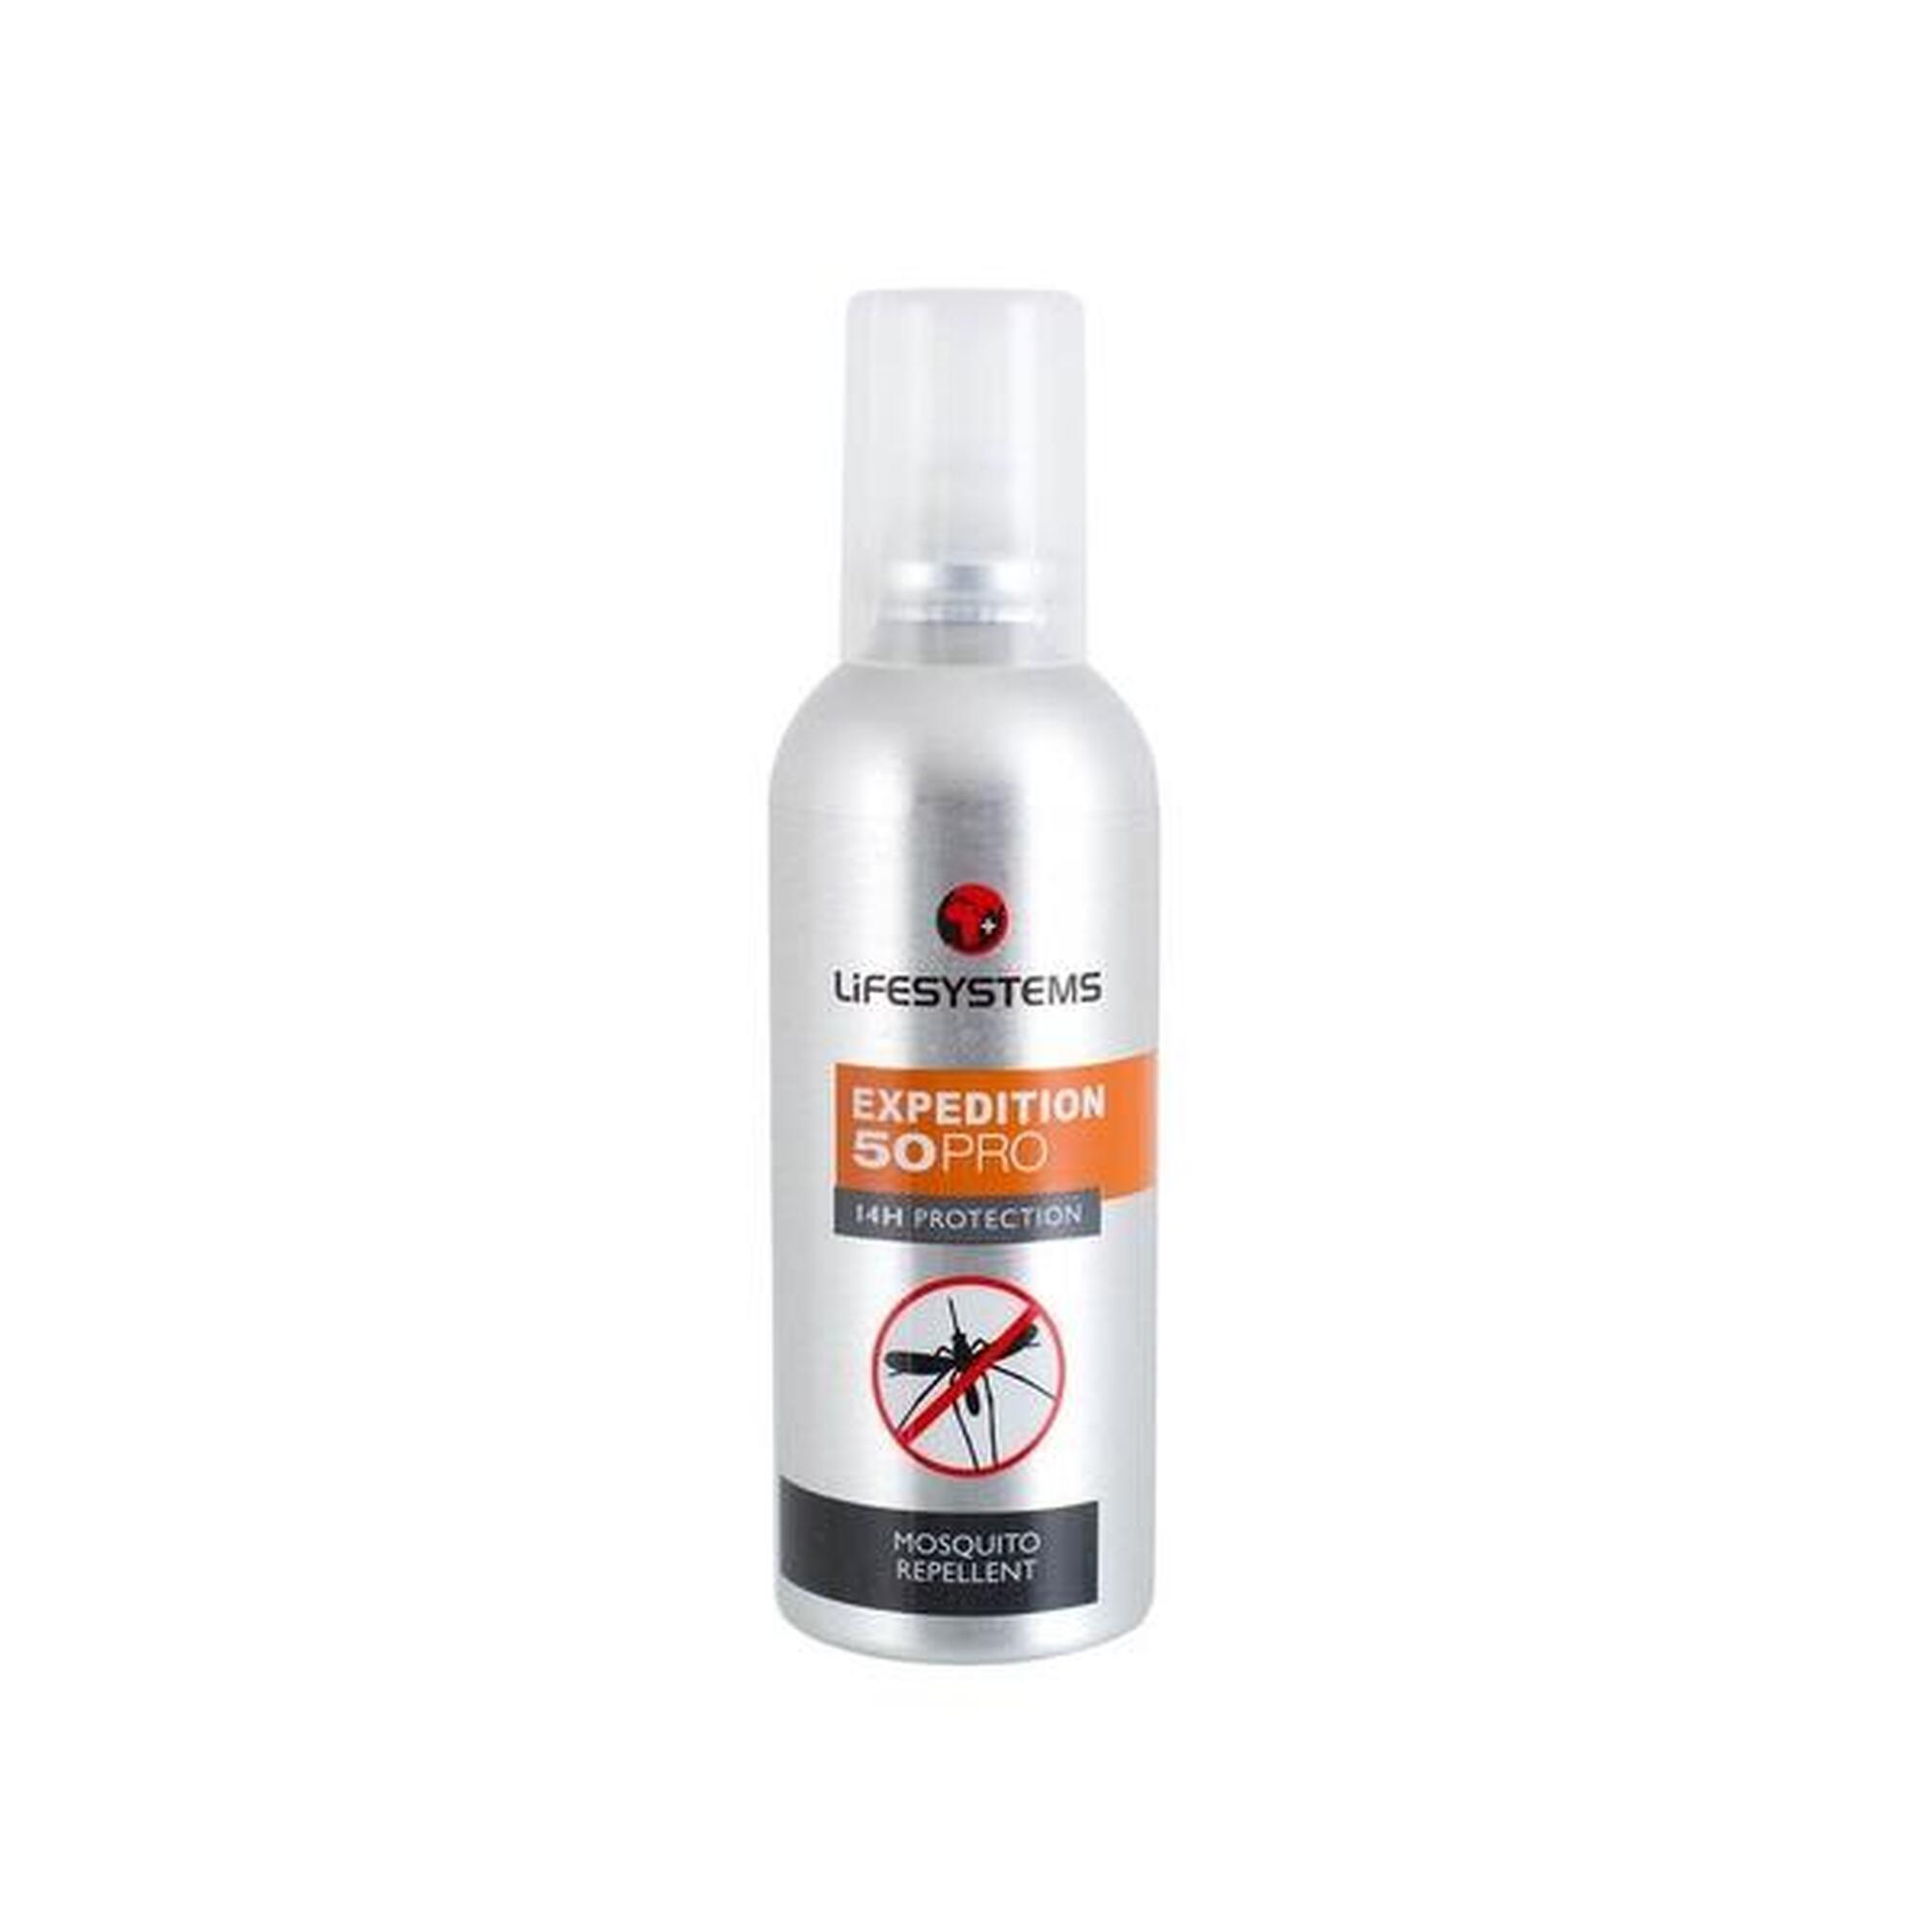 LIFESYSTEMS Expedition 50 PRO DEET Mosquito Repellent (100ml)